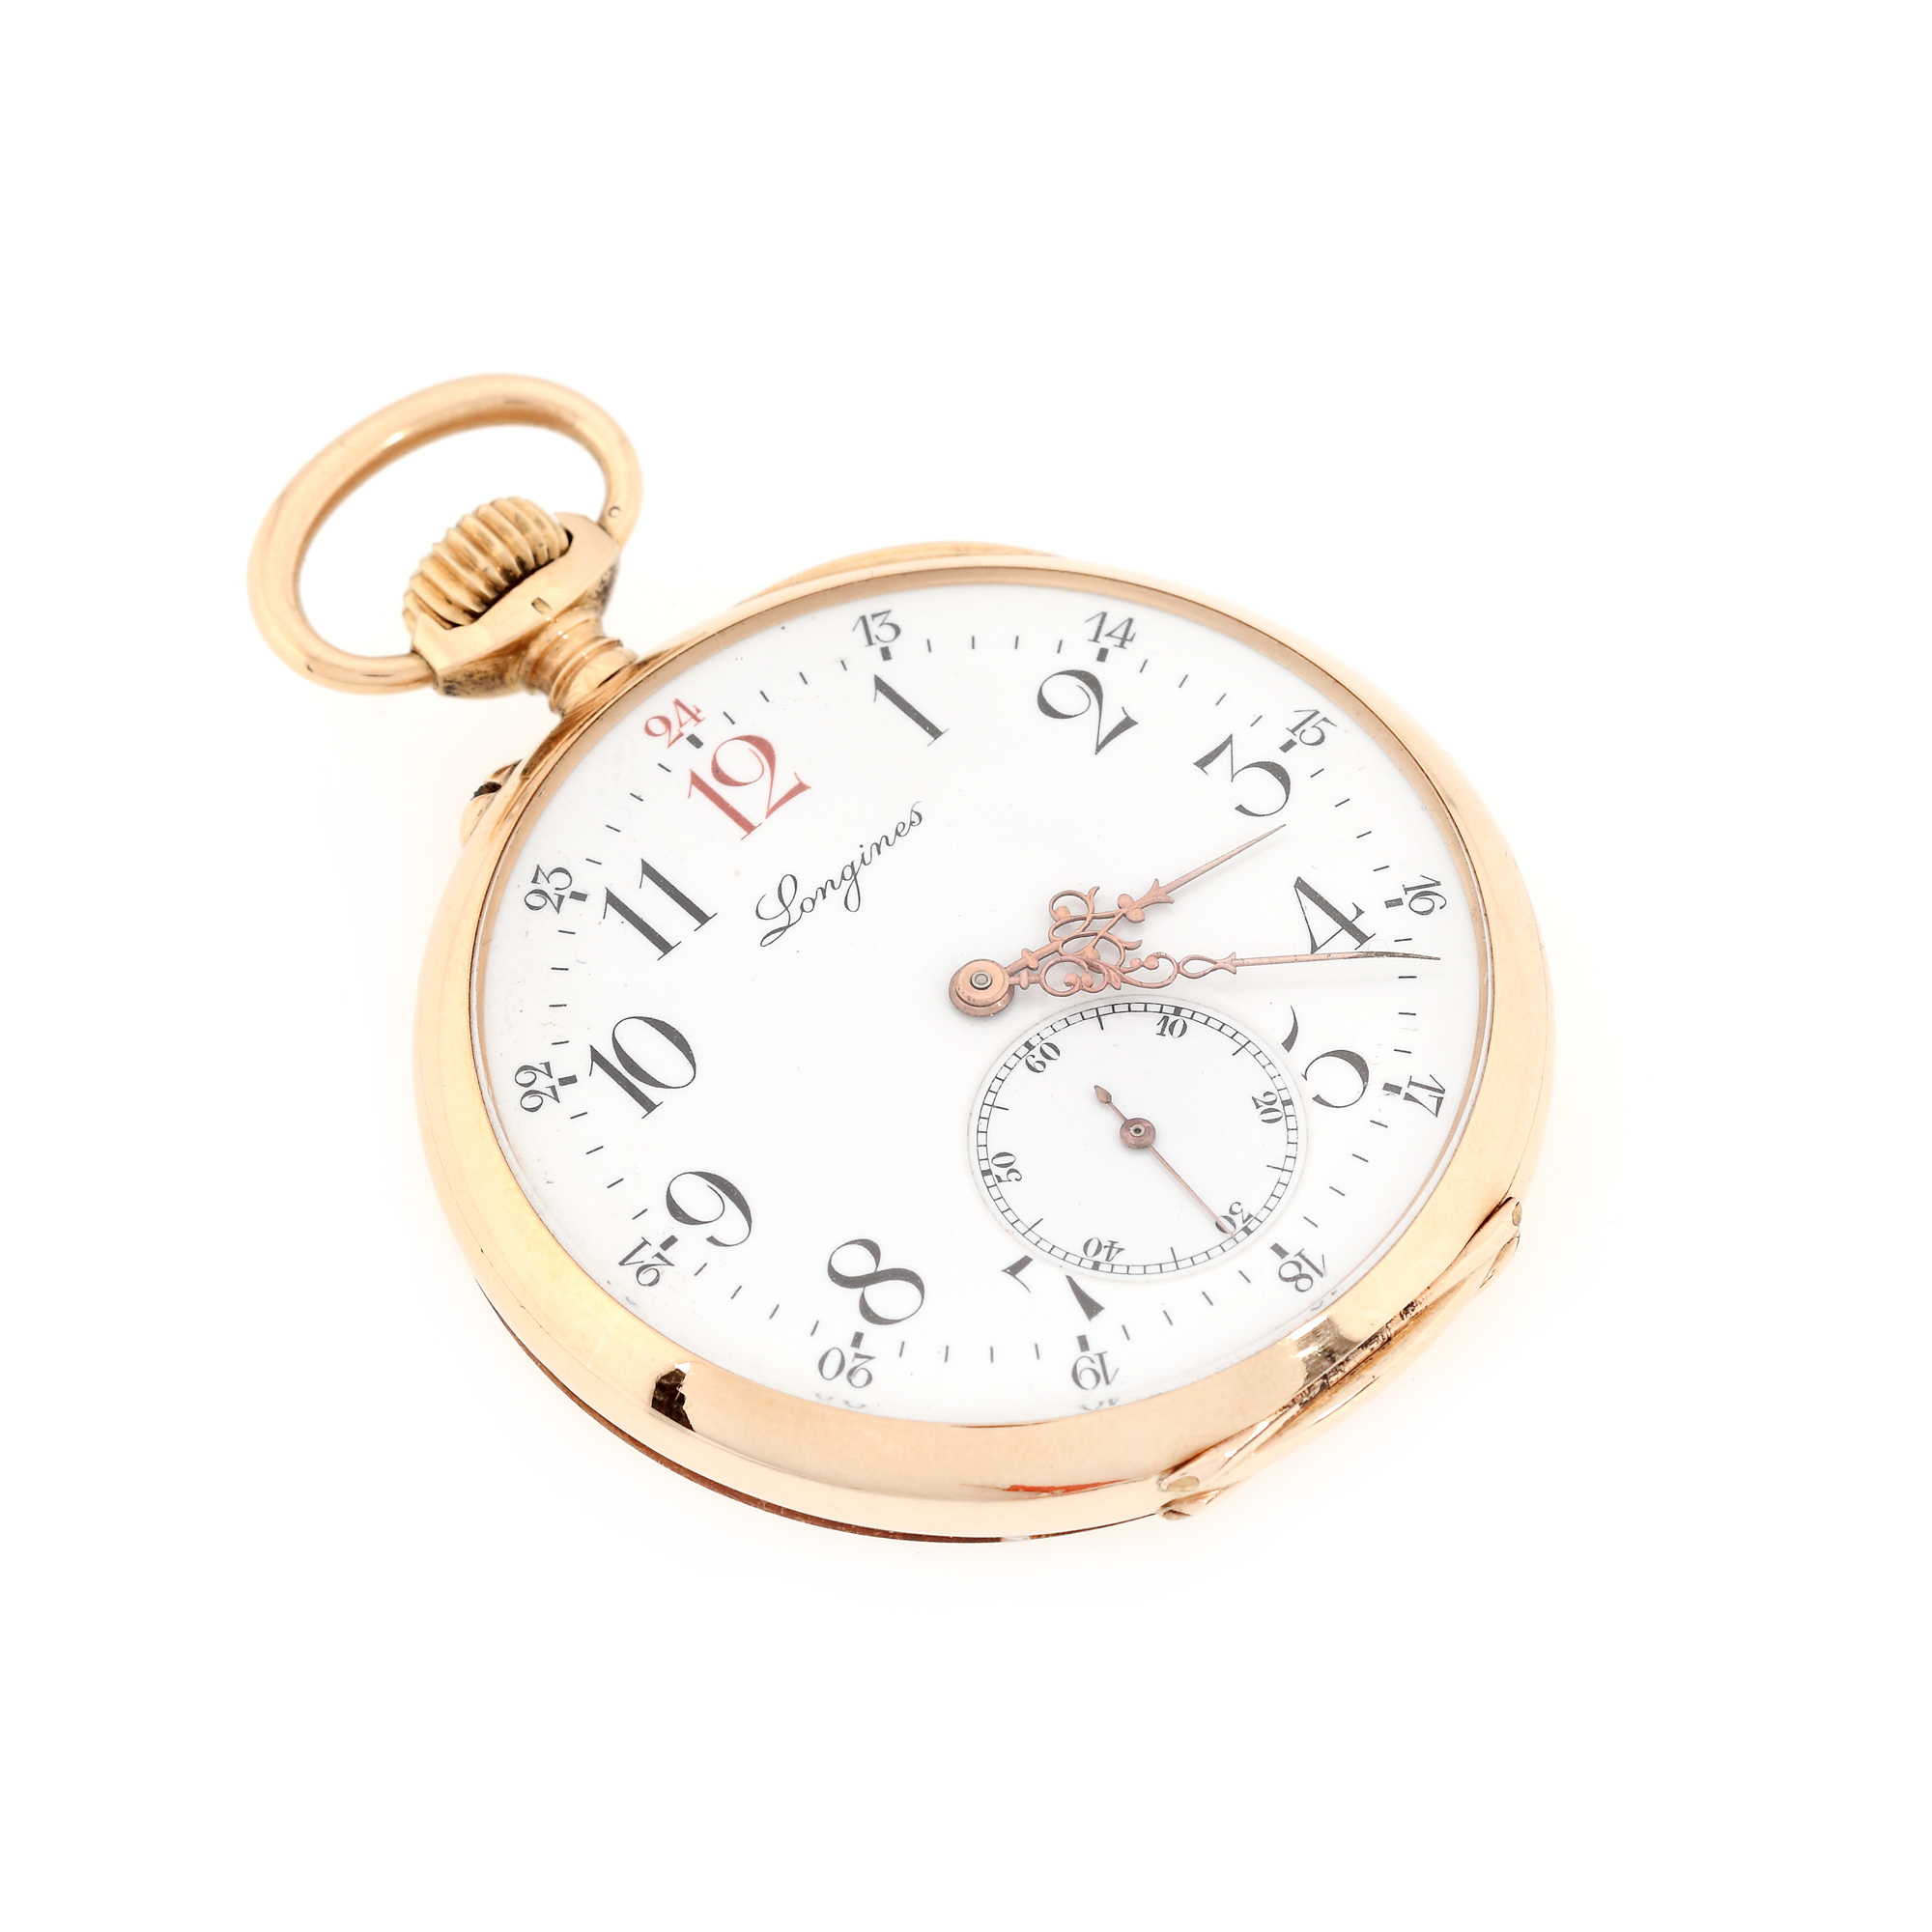 Longines pocket watch, gold, belonged to a prince Ghica - Image 4 of 5